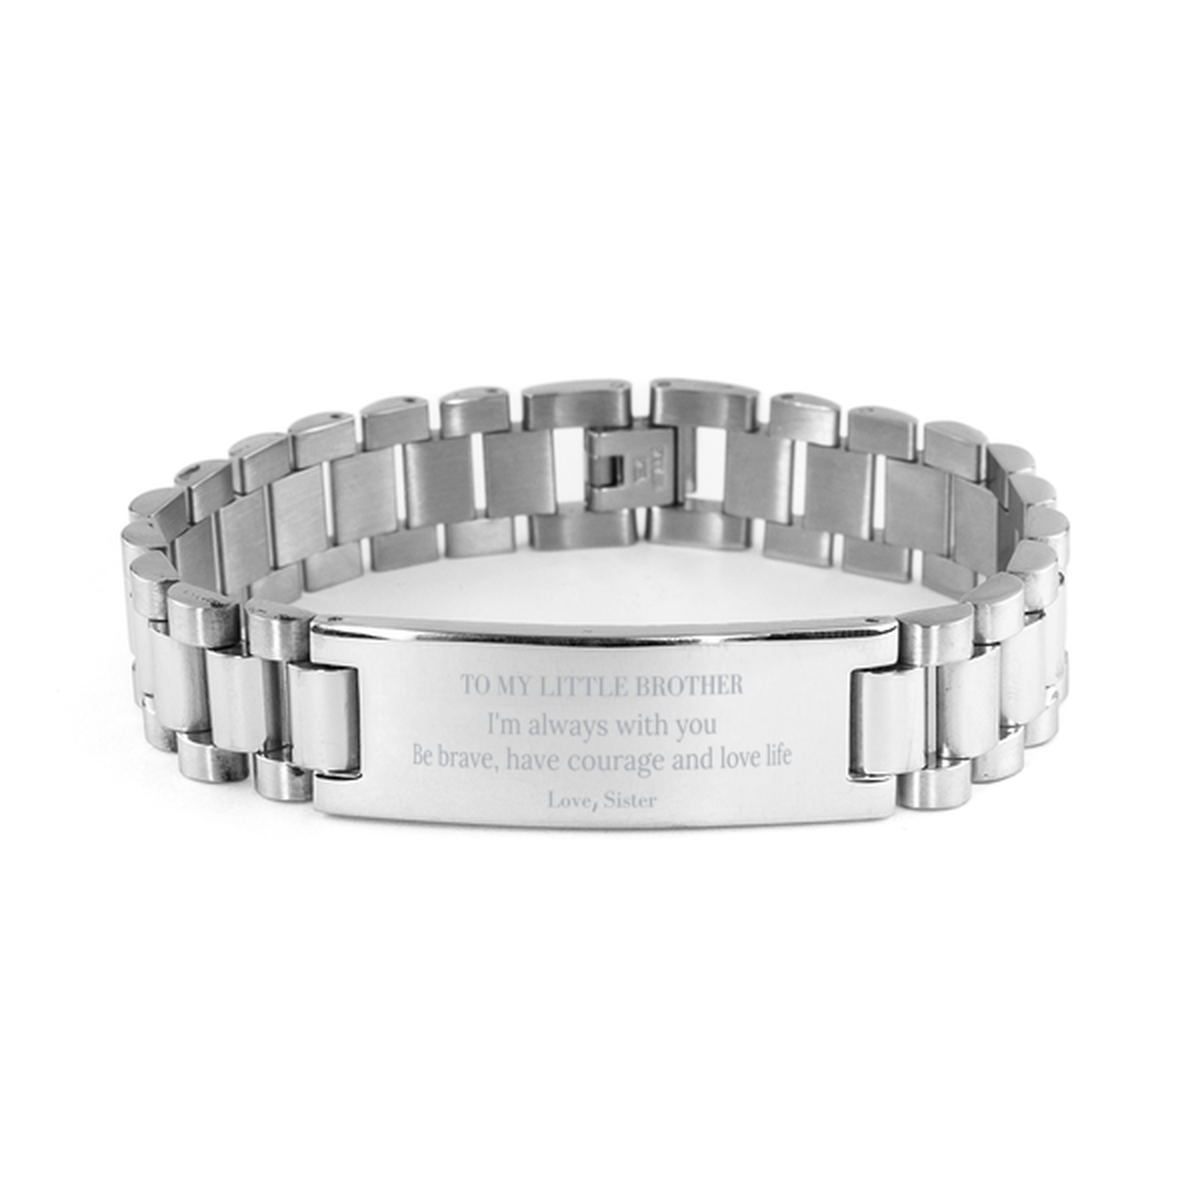 To My Little Brother Gifts from Sister, Unique Ladder Stainless Steel Bracelet Inspirational Christmas Birthday Graduation Gifts for Little Brother I'm always with you. Be brave, have courage and love life. Love, Sister